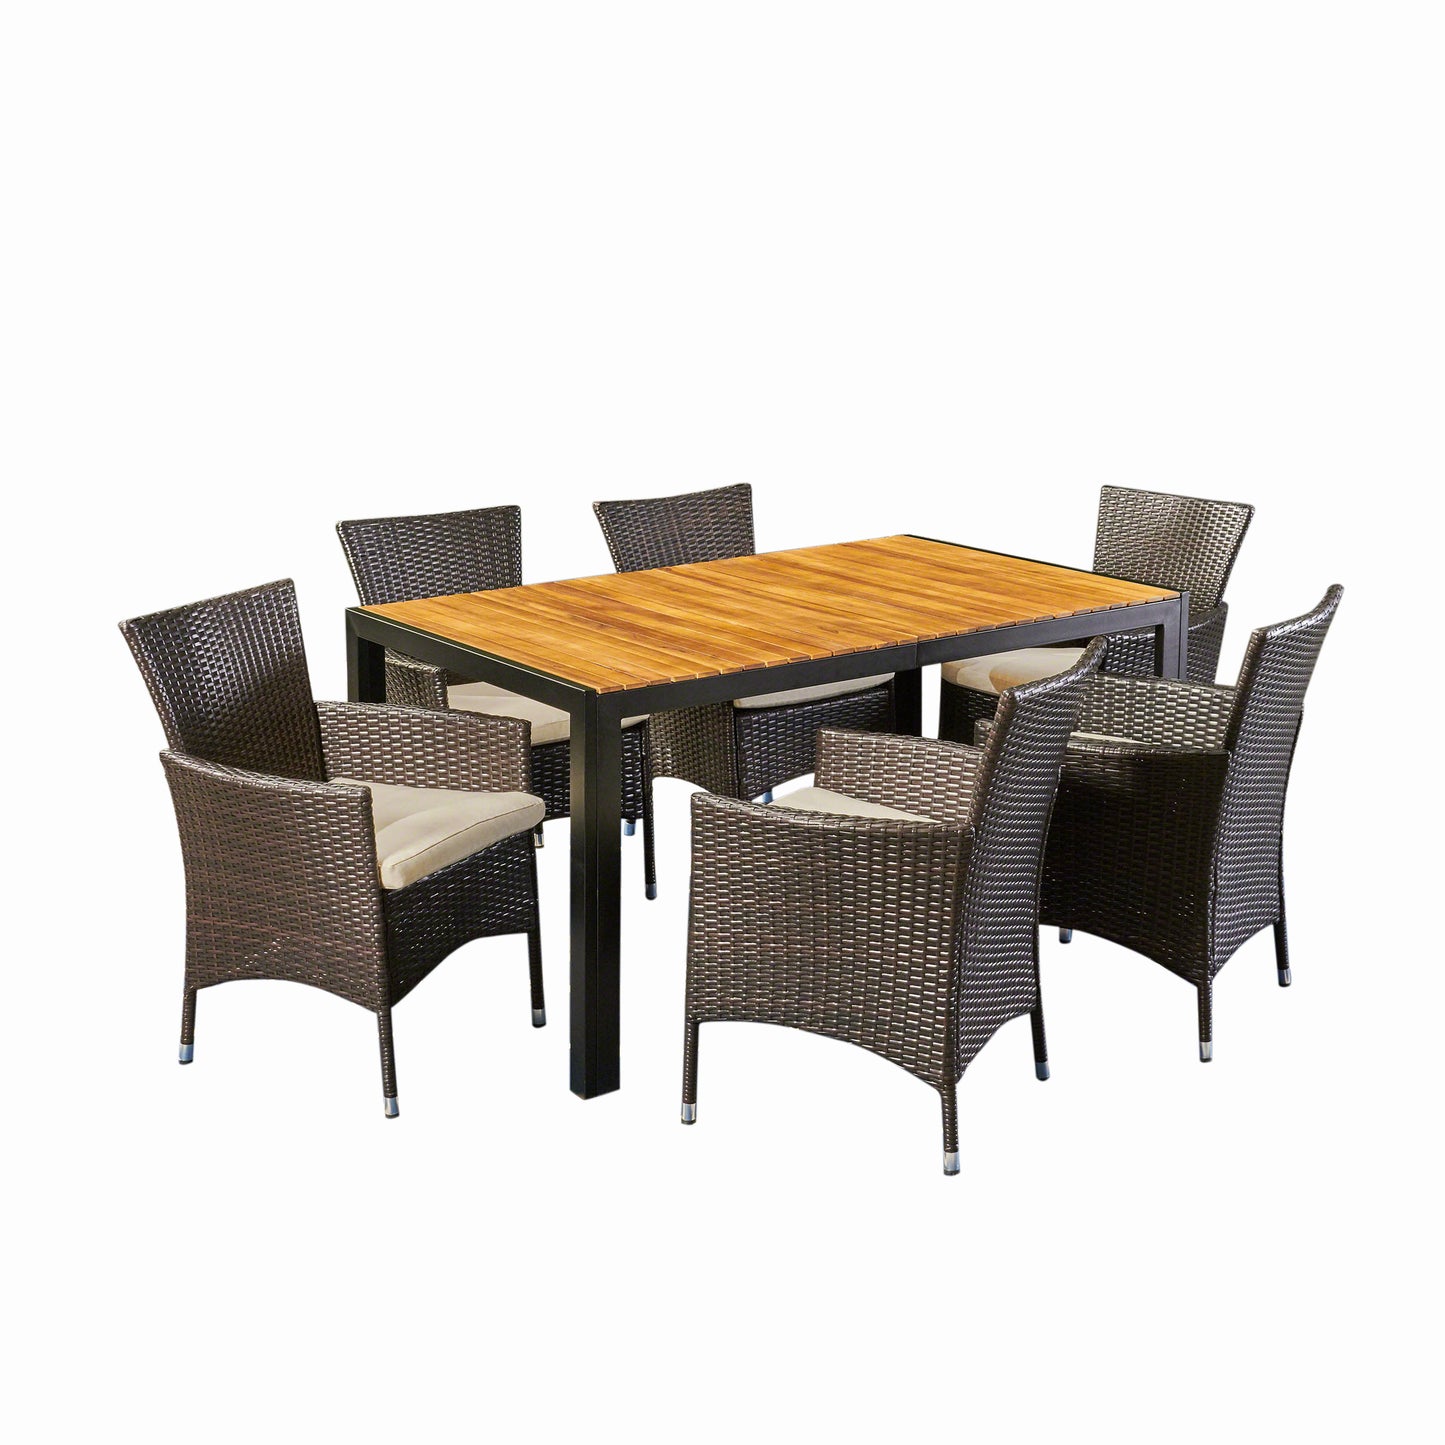 Julia Outdoor 6-Seater Rectangular Acacia Wood and Wicker Dining Set, Teak with Black and Multi Brown with Beige